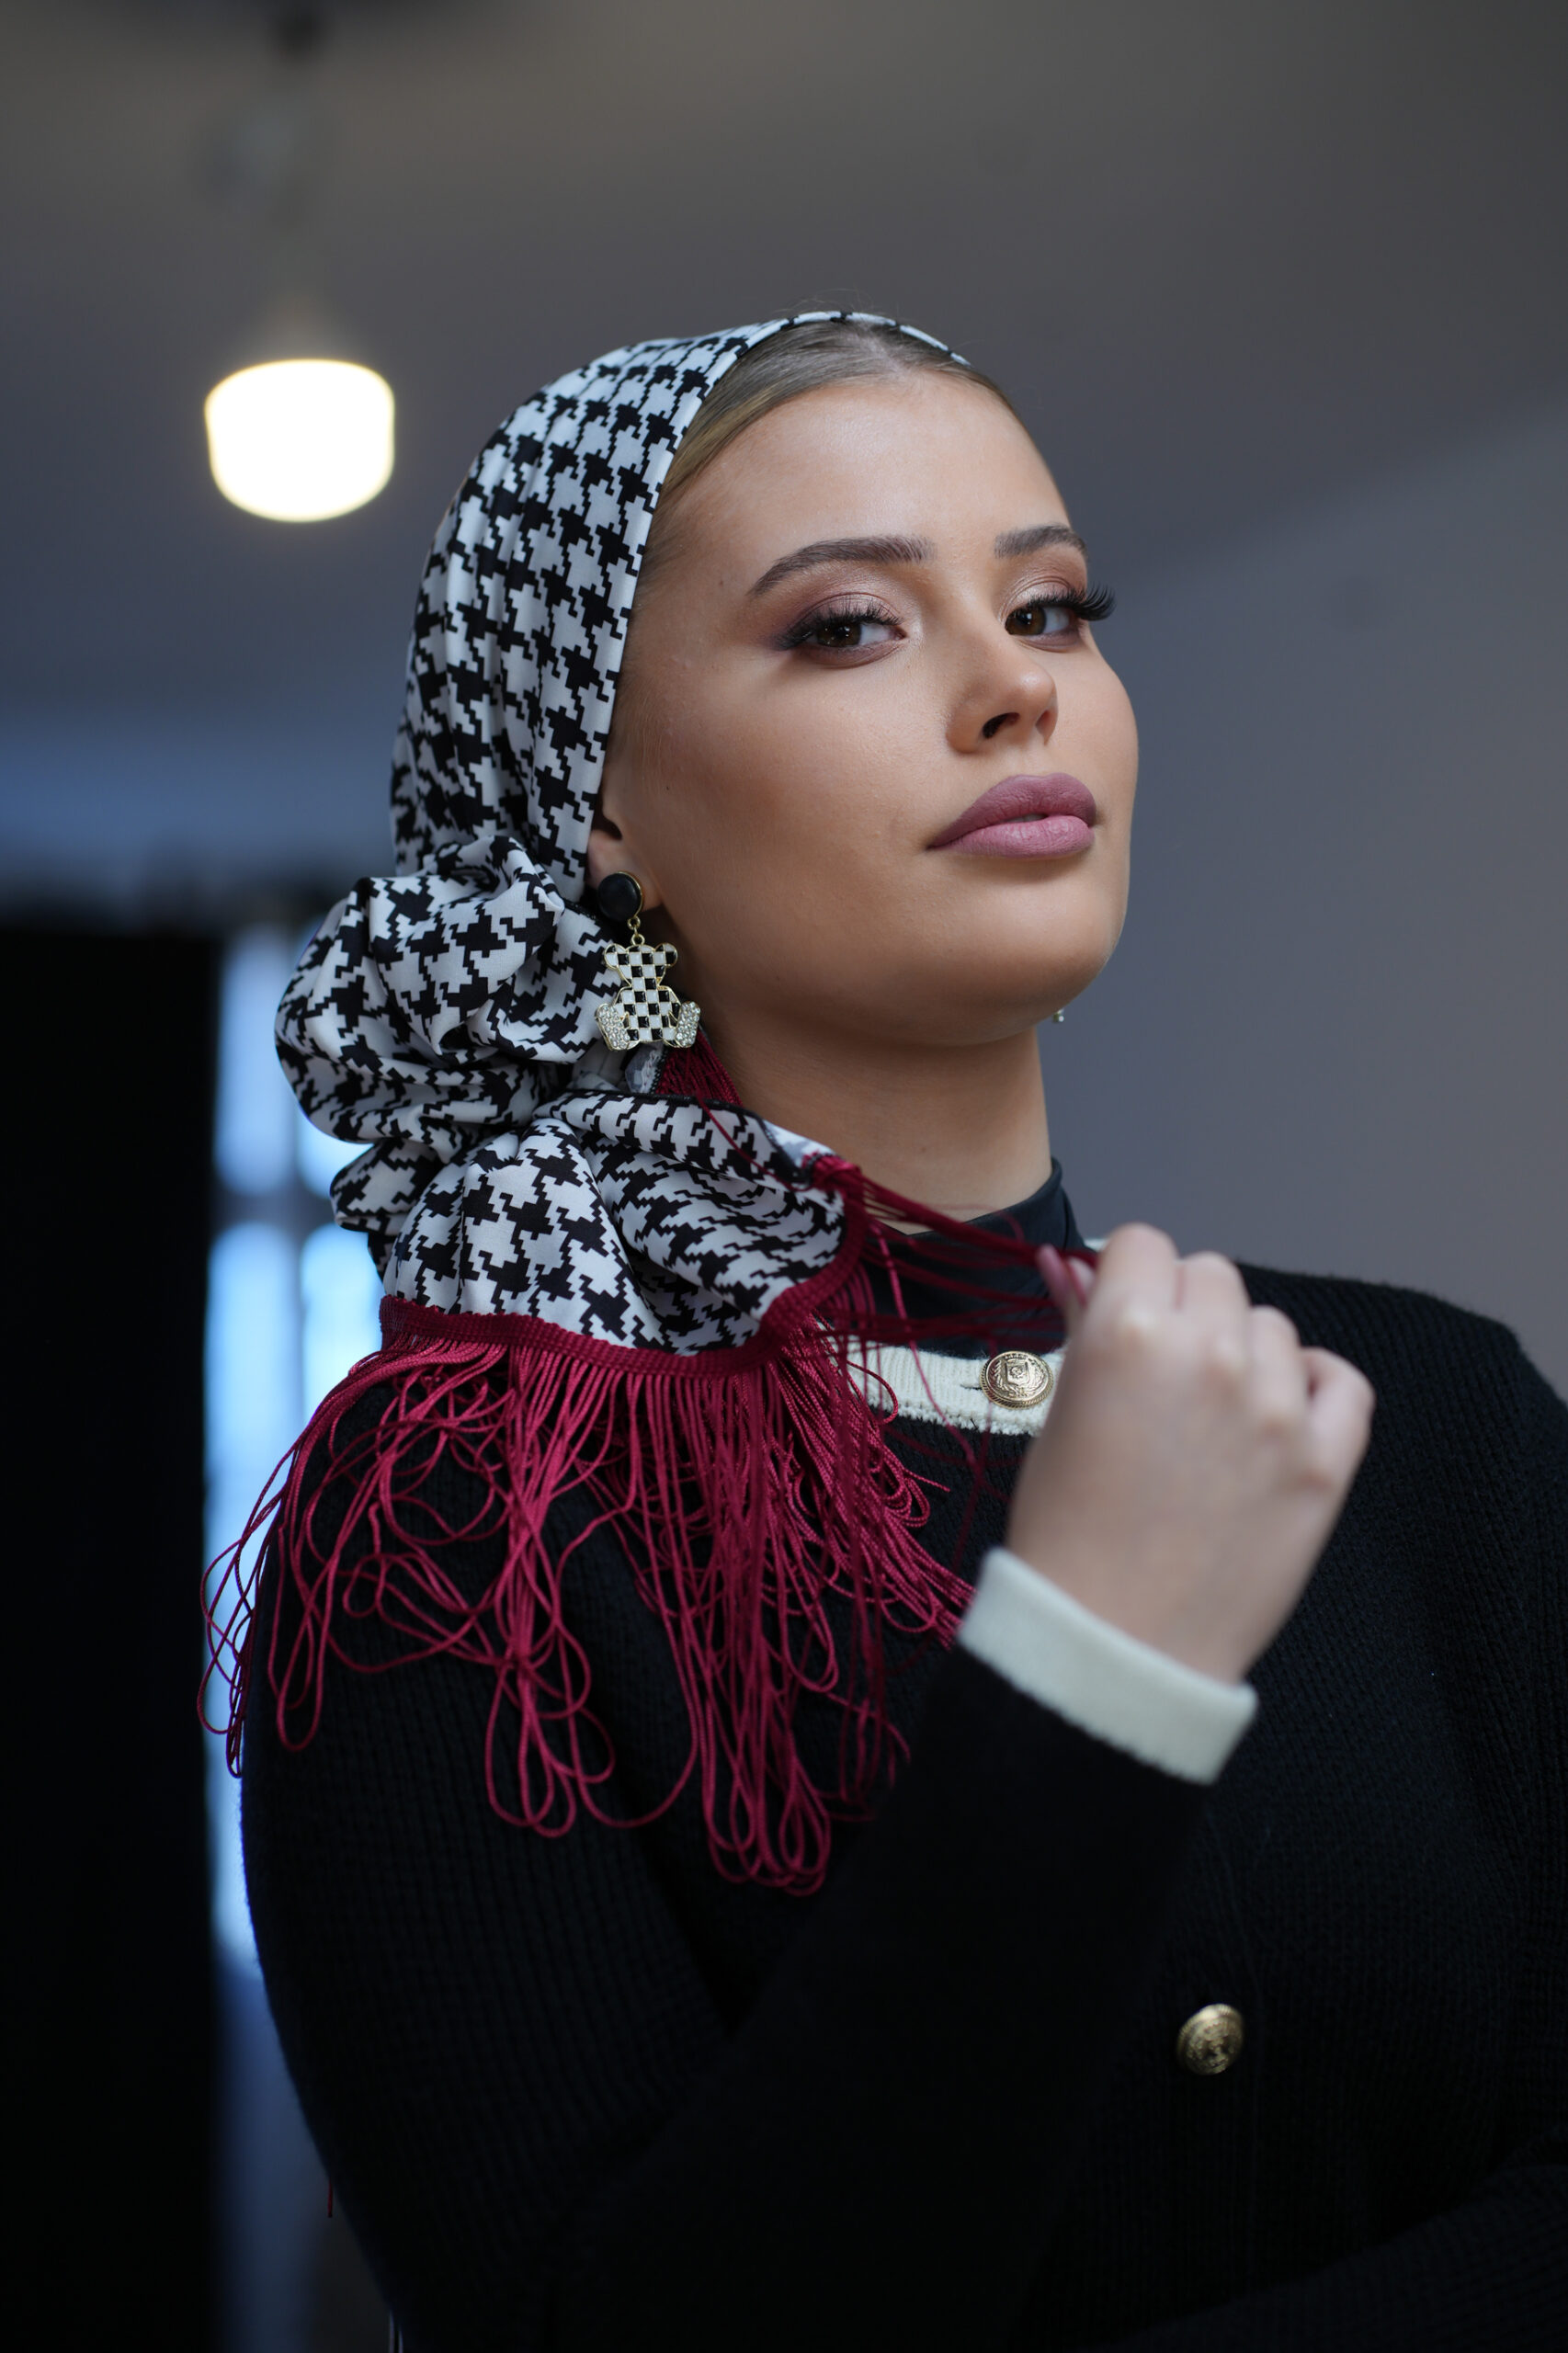 Printed Black And White headscarf With Or Without Red Fringes